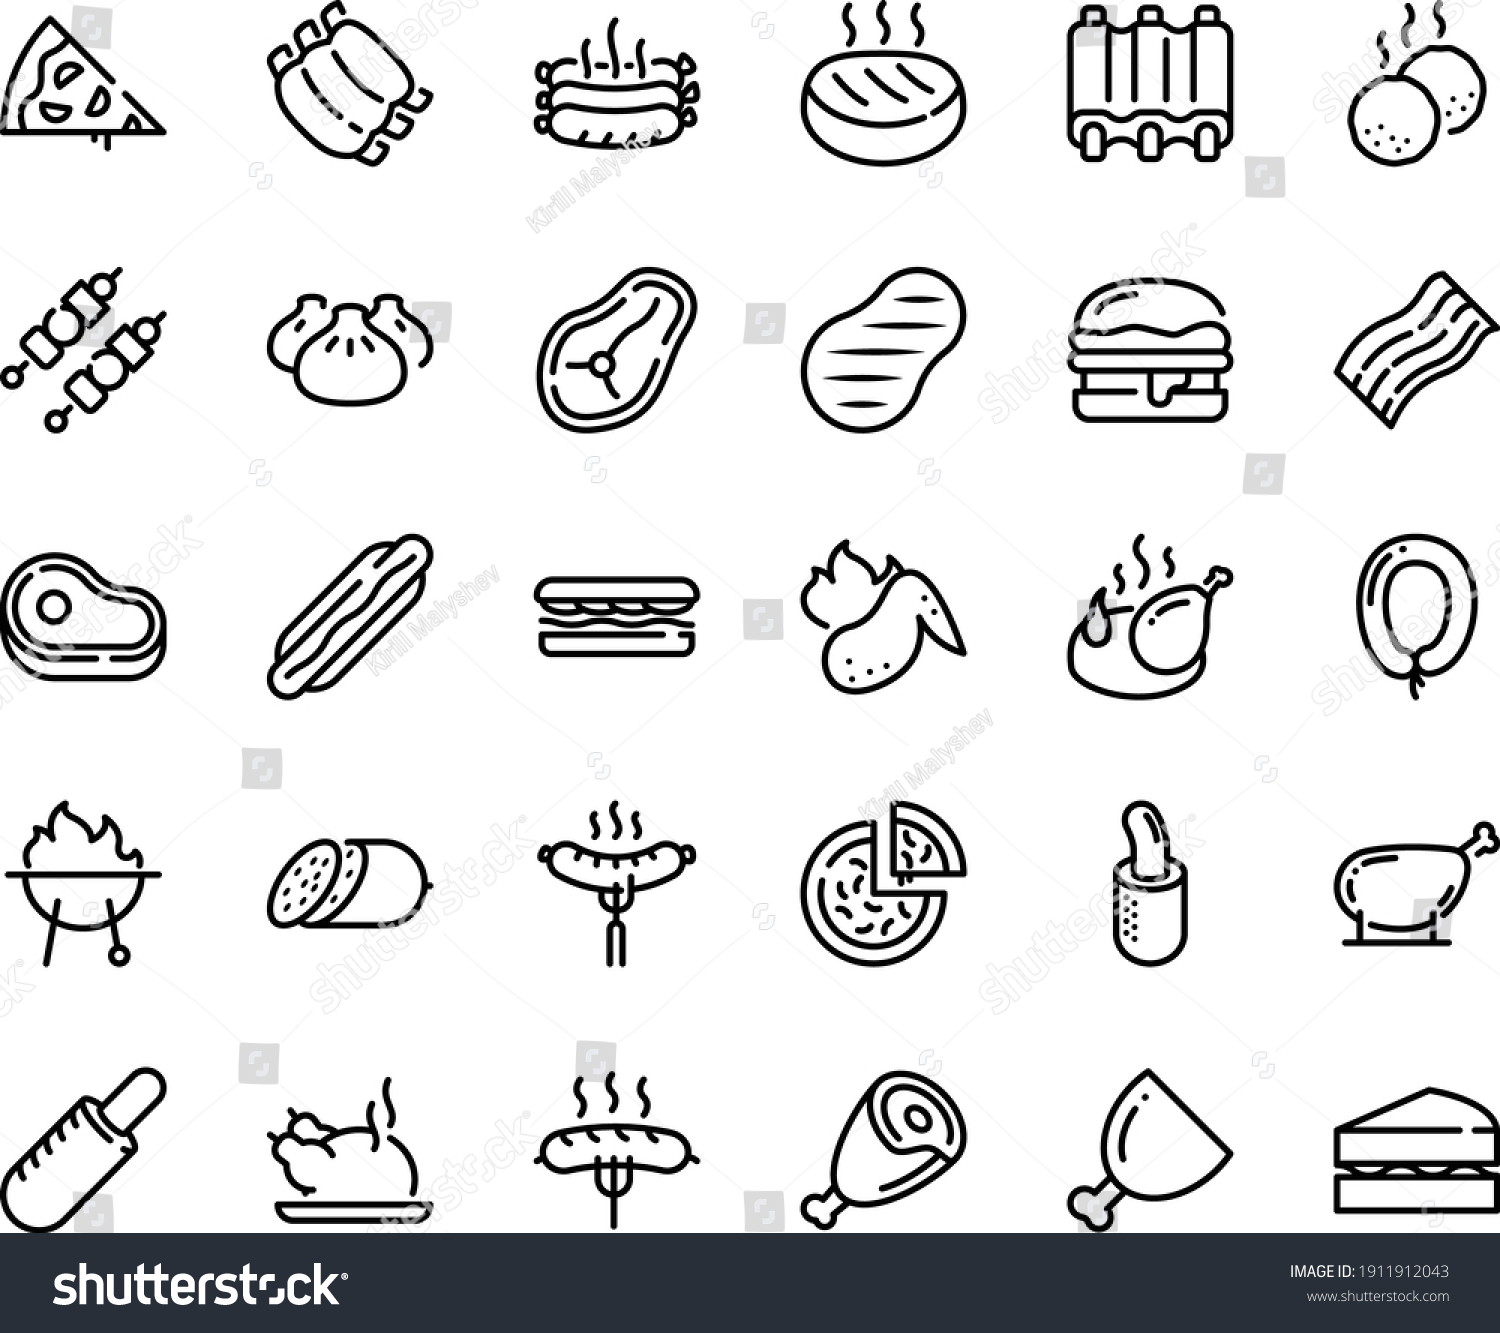 SVG of Food line icon set - pizza piece, meat, hot dog, sandwich, french, dim sum, chinese chicken, salami, sausage on fork, ham, burger, fried, ribs, kebab, roasted sausages, cutlet, steak, leg, sowbelly svg